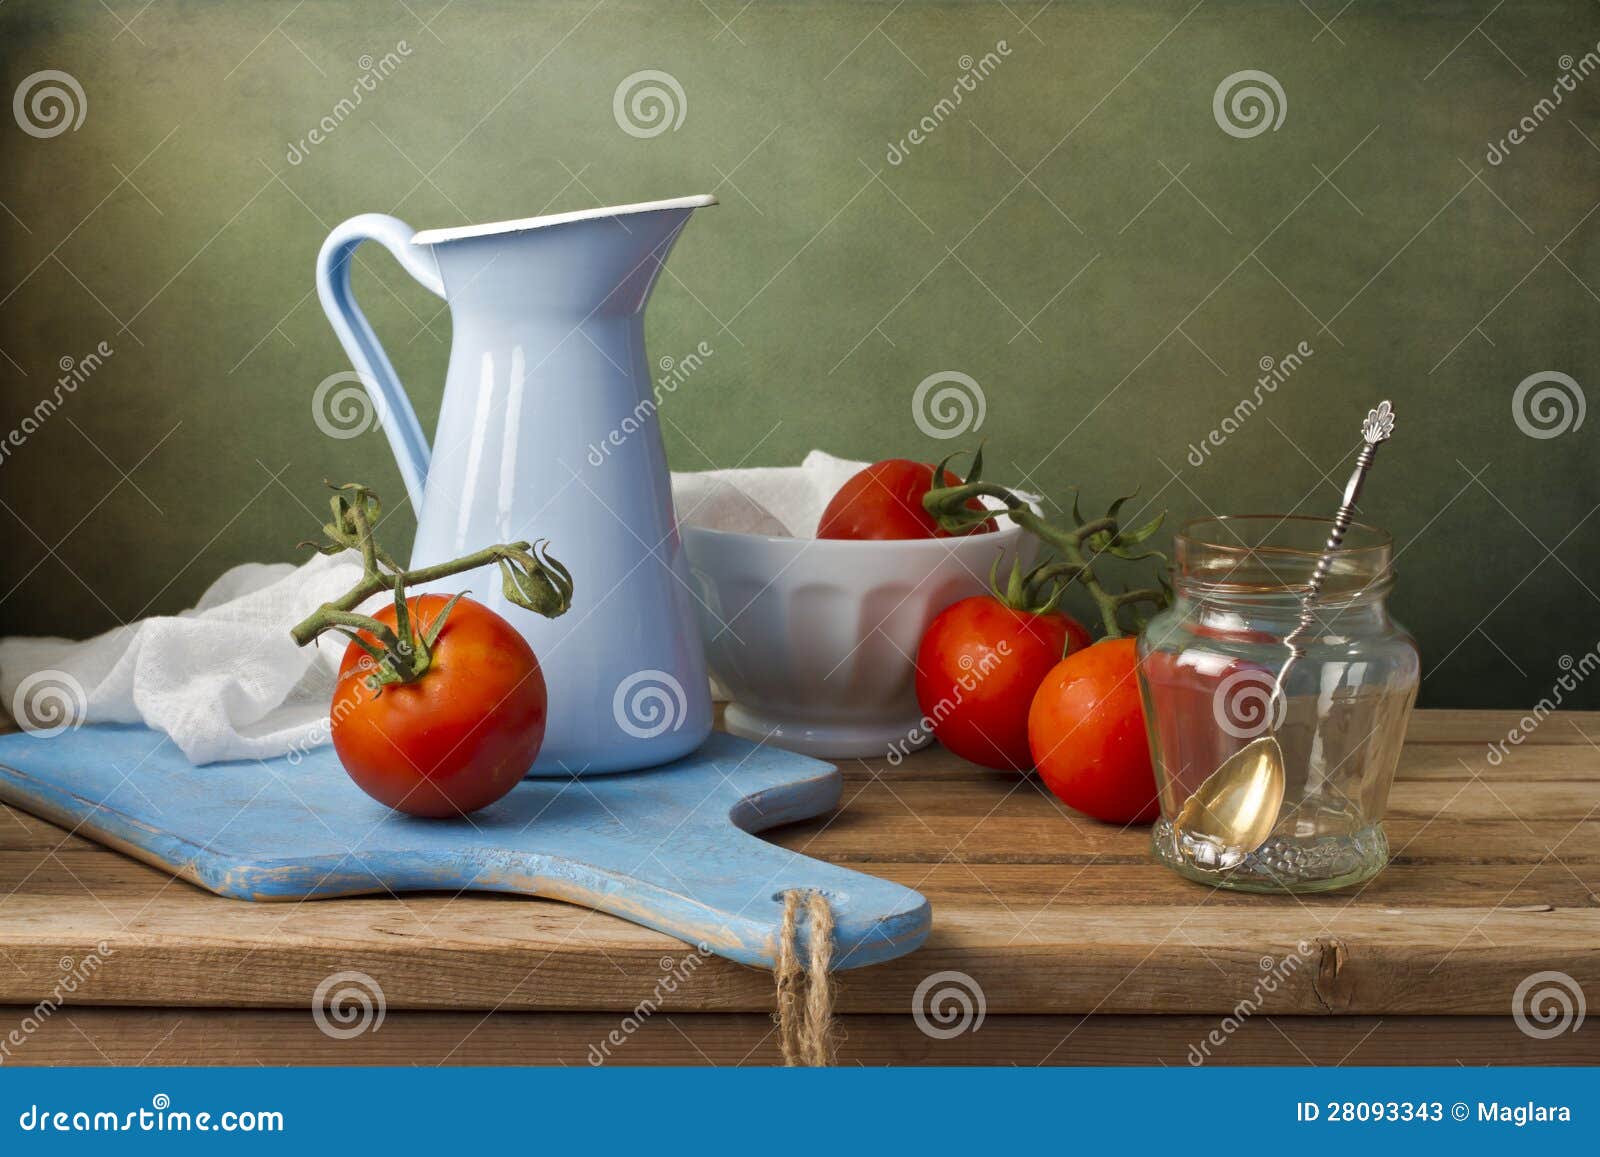 Still Life with Fresh Tomatoes and Tableware Stock Image - Image of ...